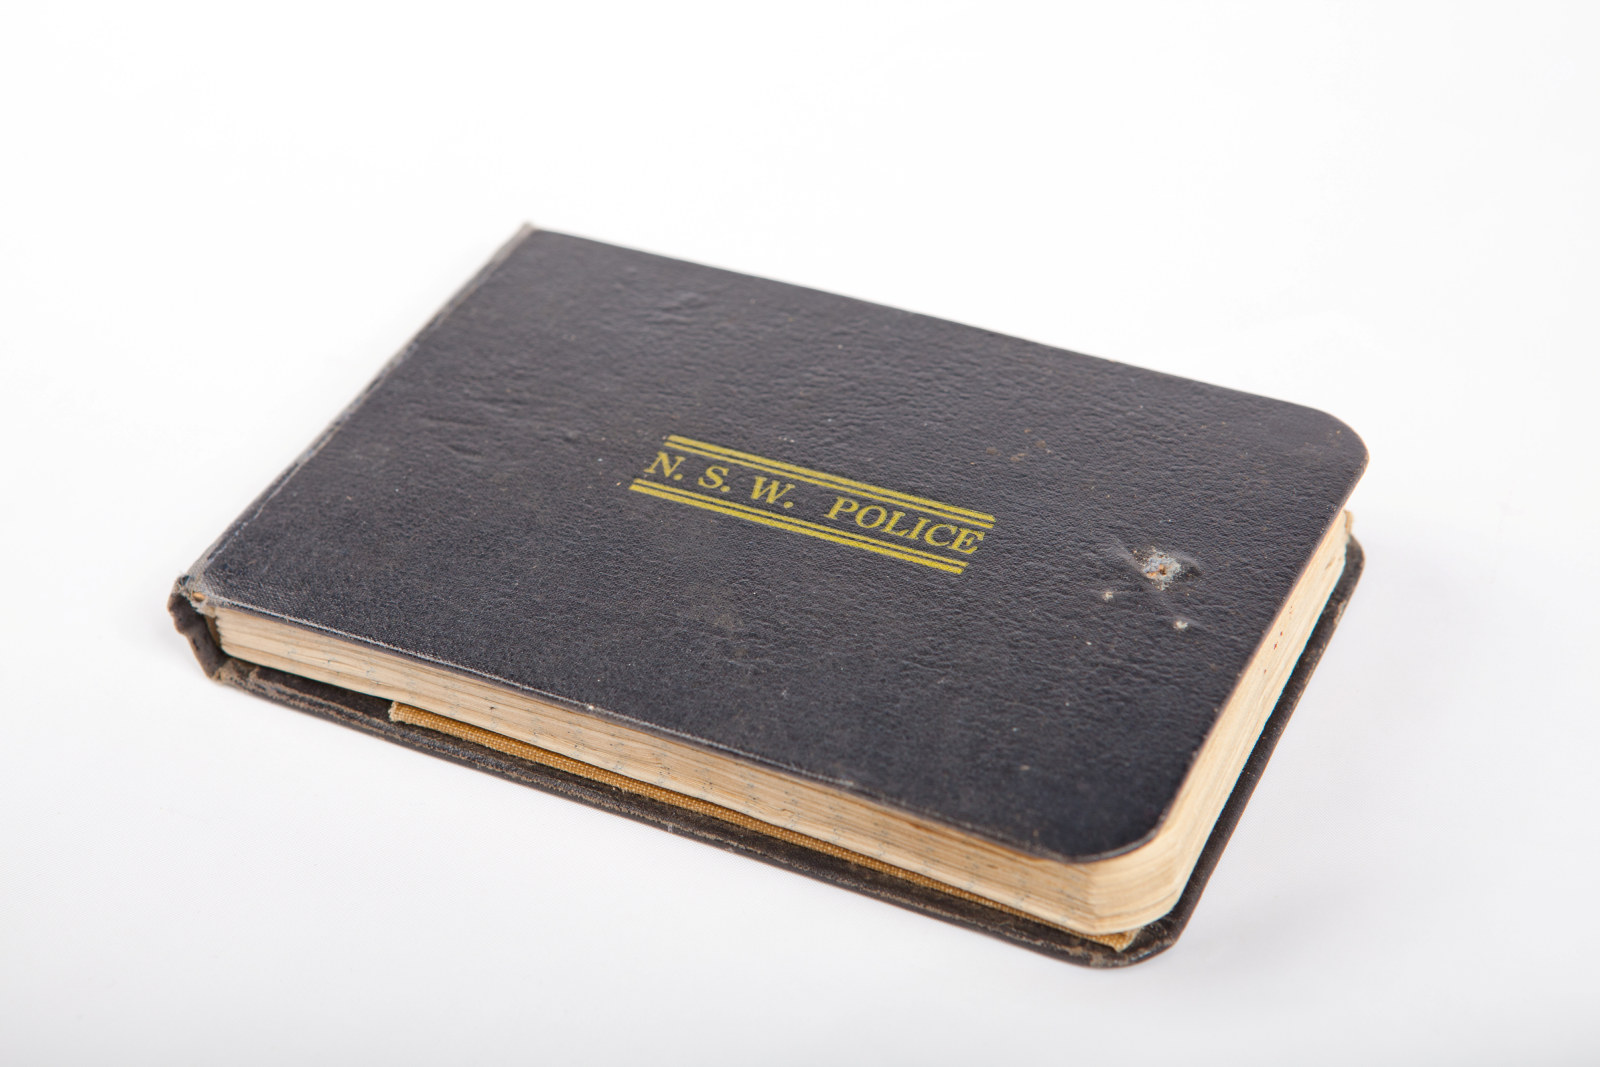 NSW Police Note book belonging to Constable Cyril Howe who was killed on duty in 1963.